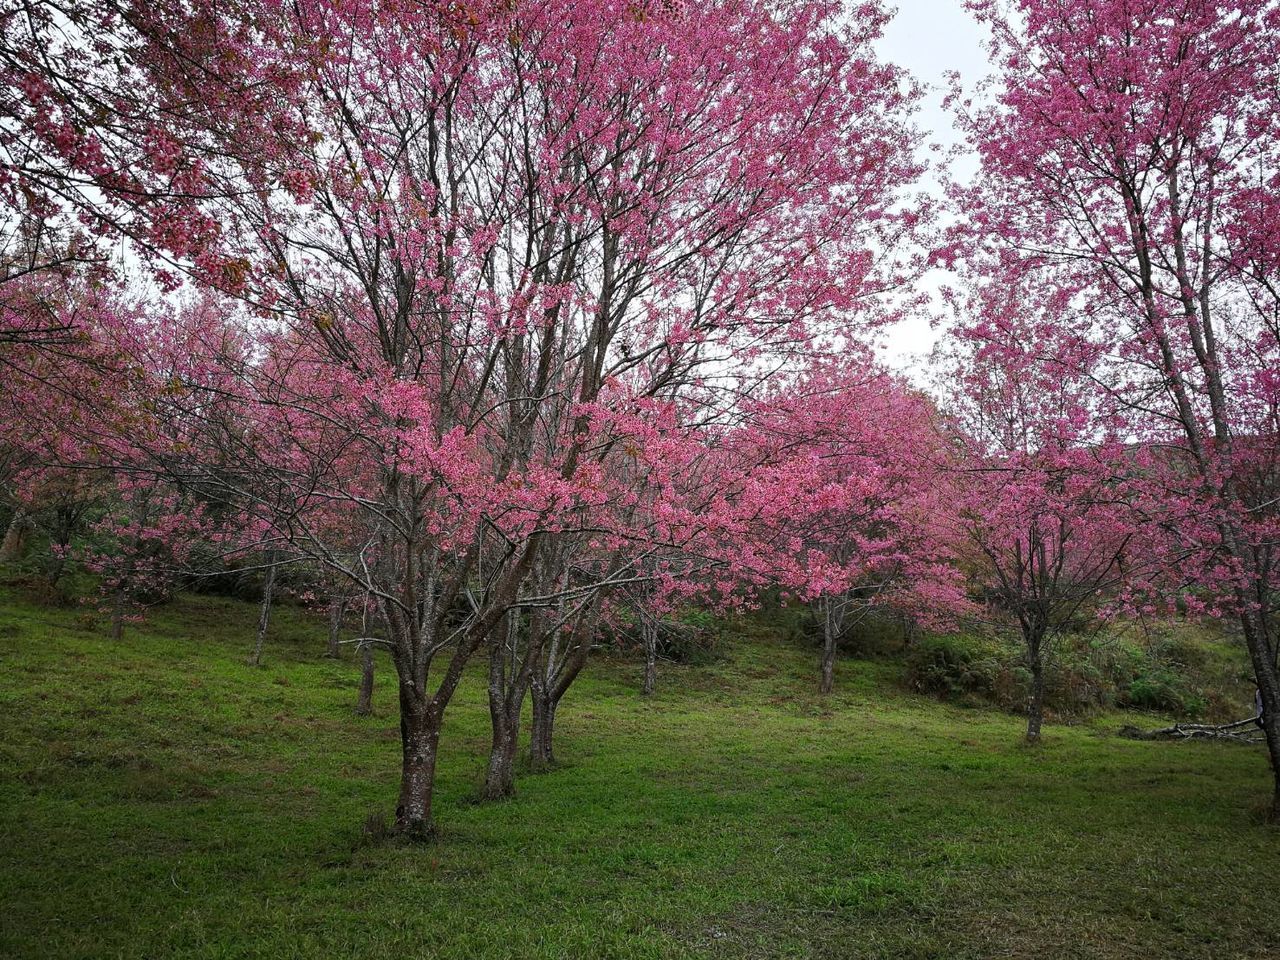 tree, plant, beauty in nature, growth, flower, nature, land, springtime, blossom, scenics - nature, tranquility, flowering plant, pink color, tranquil scene, grass, landscape, freshness, no people, day, branch, outdoors, cherry blossom, cherry tree, spring